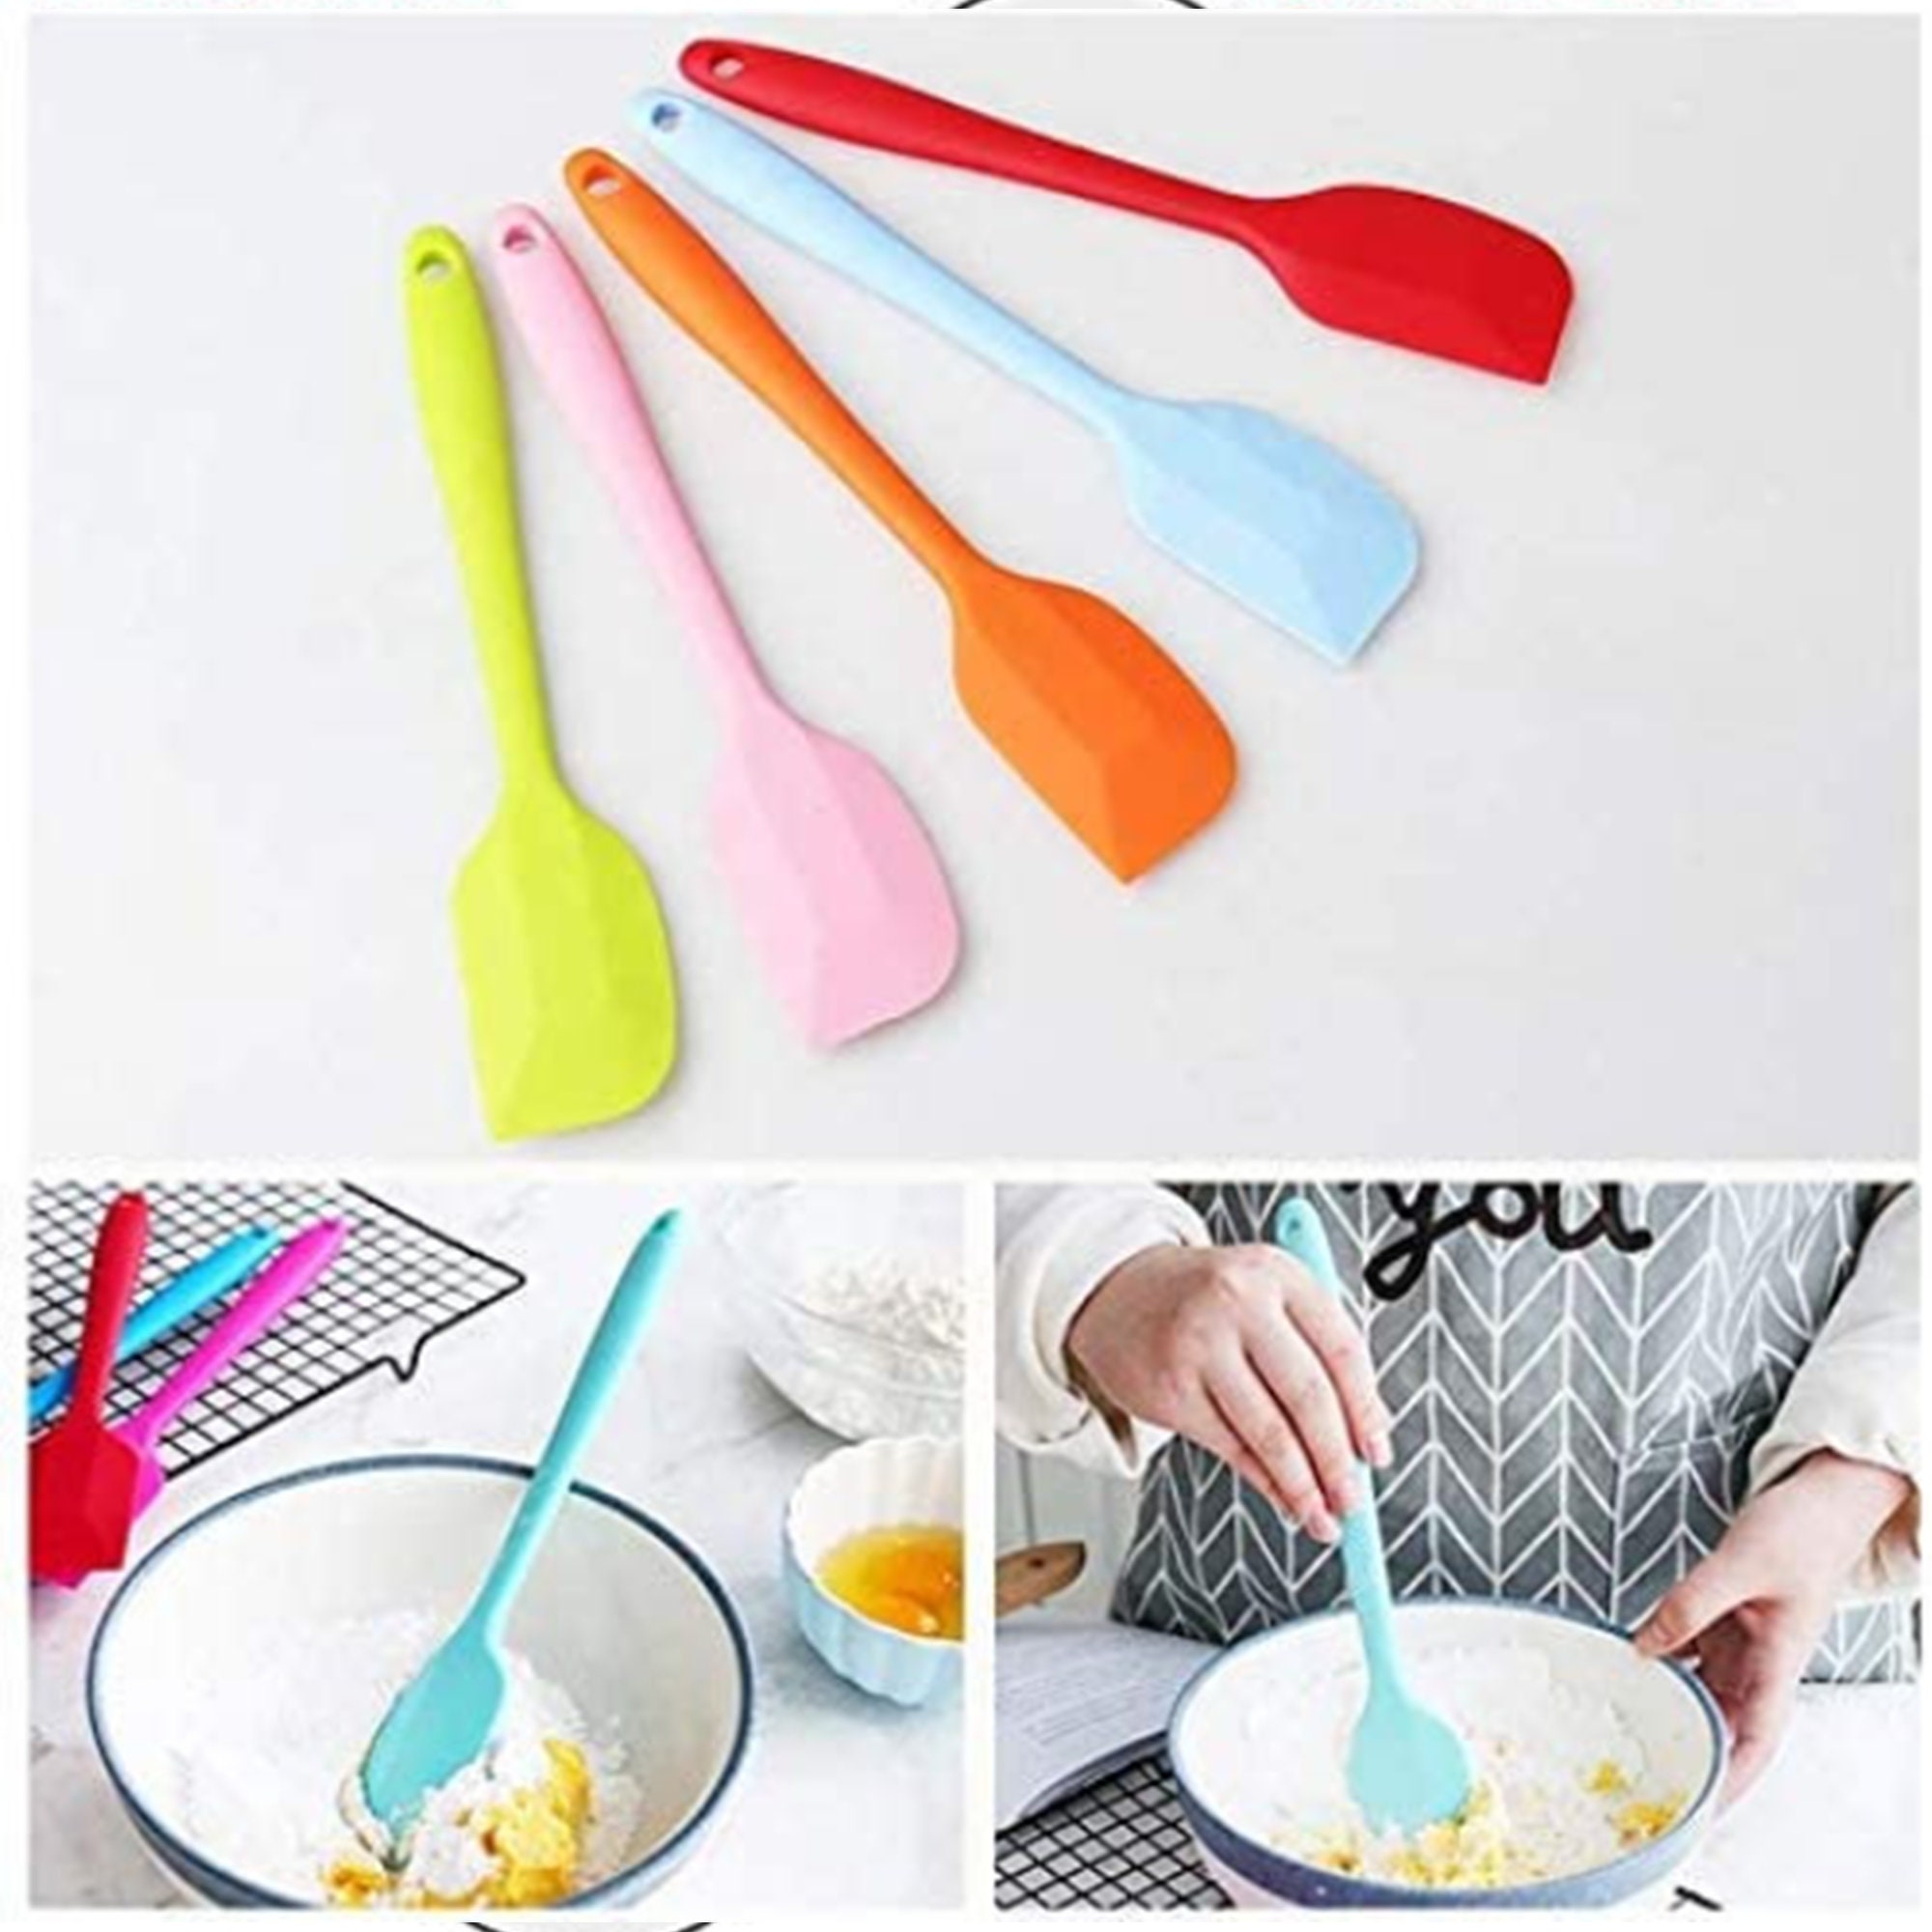 Evelots Mini Spatulas-Silicone-Heat Resistant-Frosting/Spreading/Cooking-Set/5 